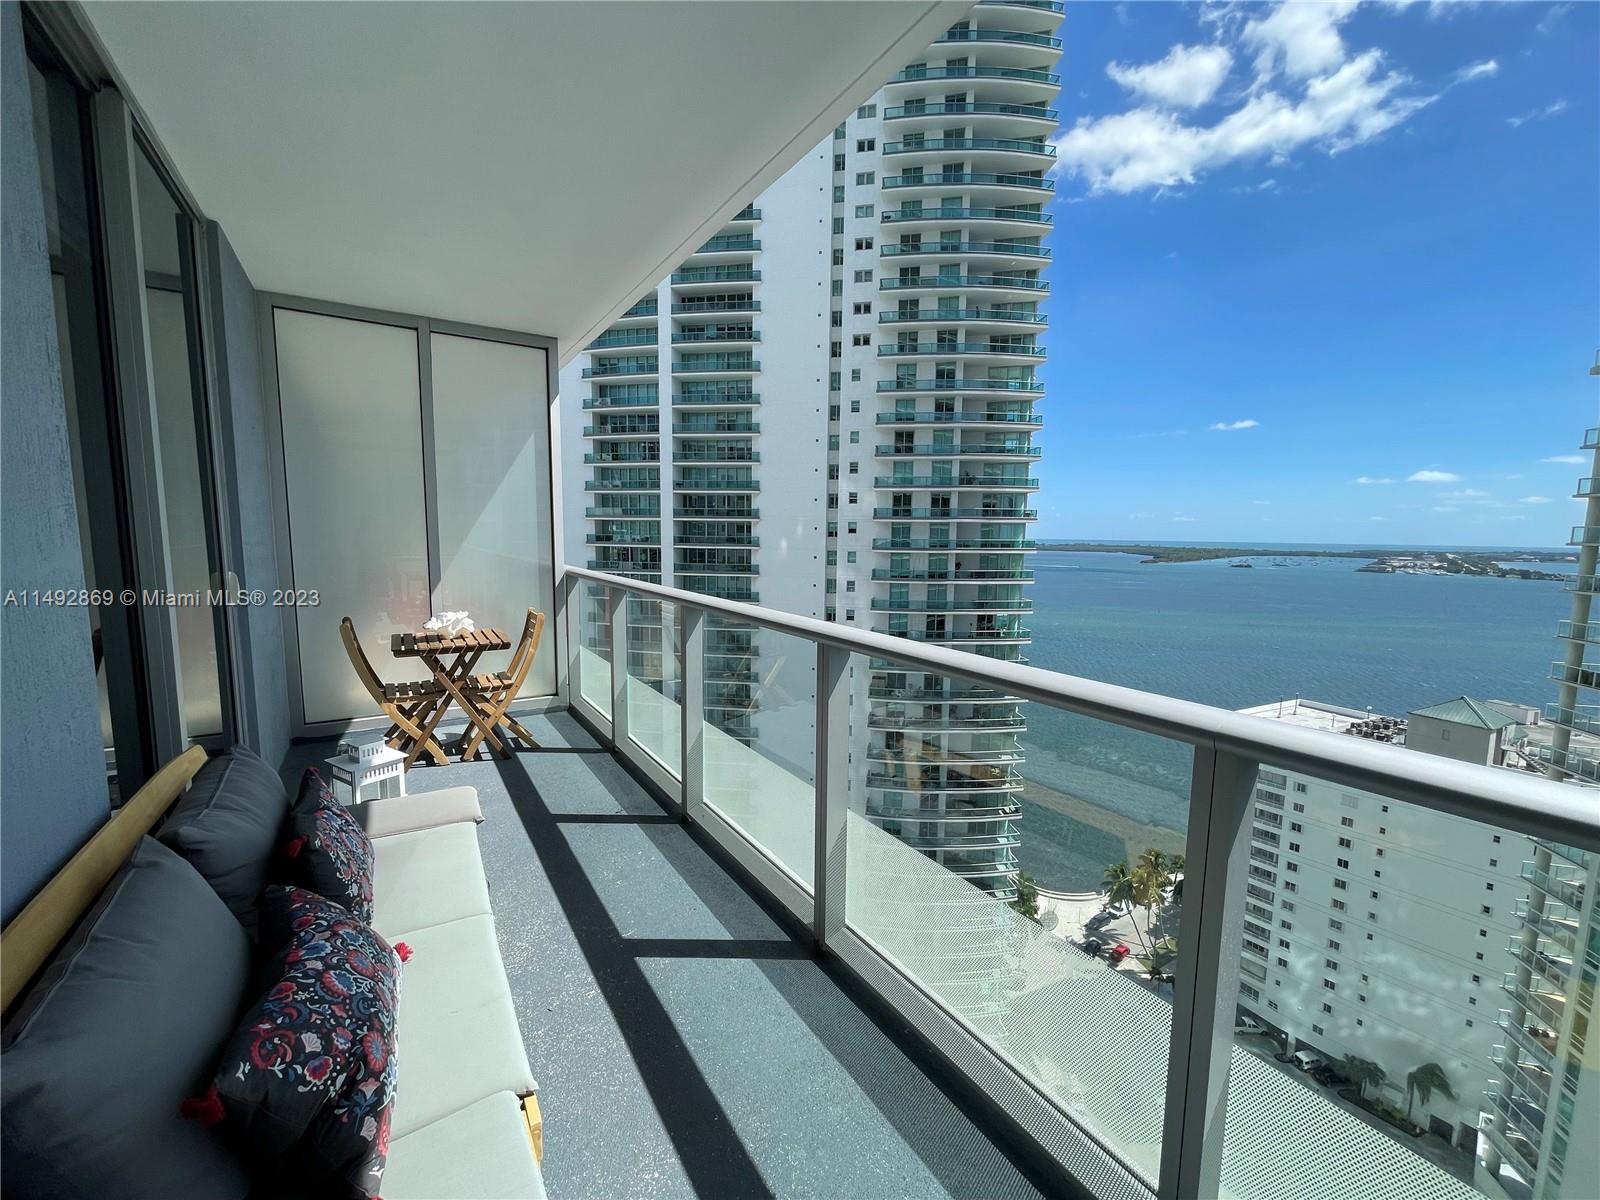 This beautiful and luxury 1 bedroom condo is located at the heart of Brickell, with breathtaking sea views from all the apartment, exceptional top amenities, fully equipped gym, sauna, grill, hot tub, two pools one located in the roof floor (43th) with the most amazing views of Miami, the bay and sunsets. Walking distance to the best restaurants in Brickell, 7 minutes away from Miami Beach.